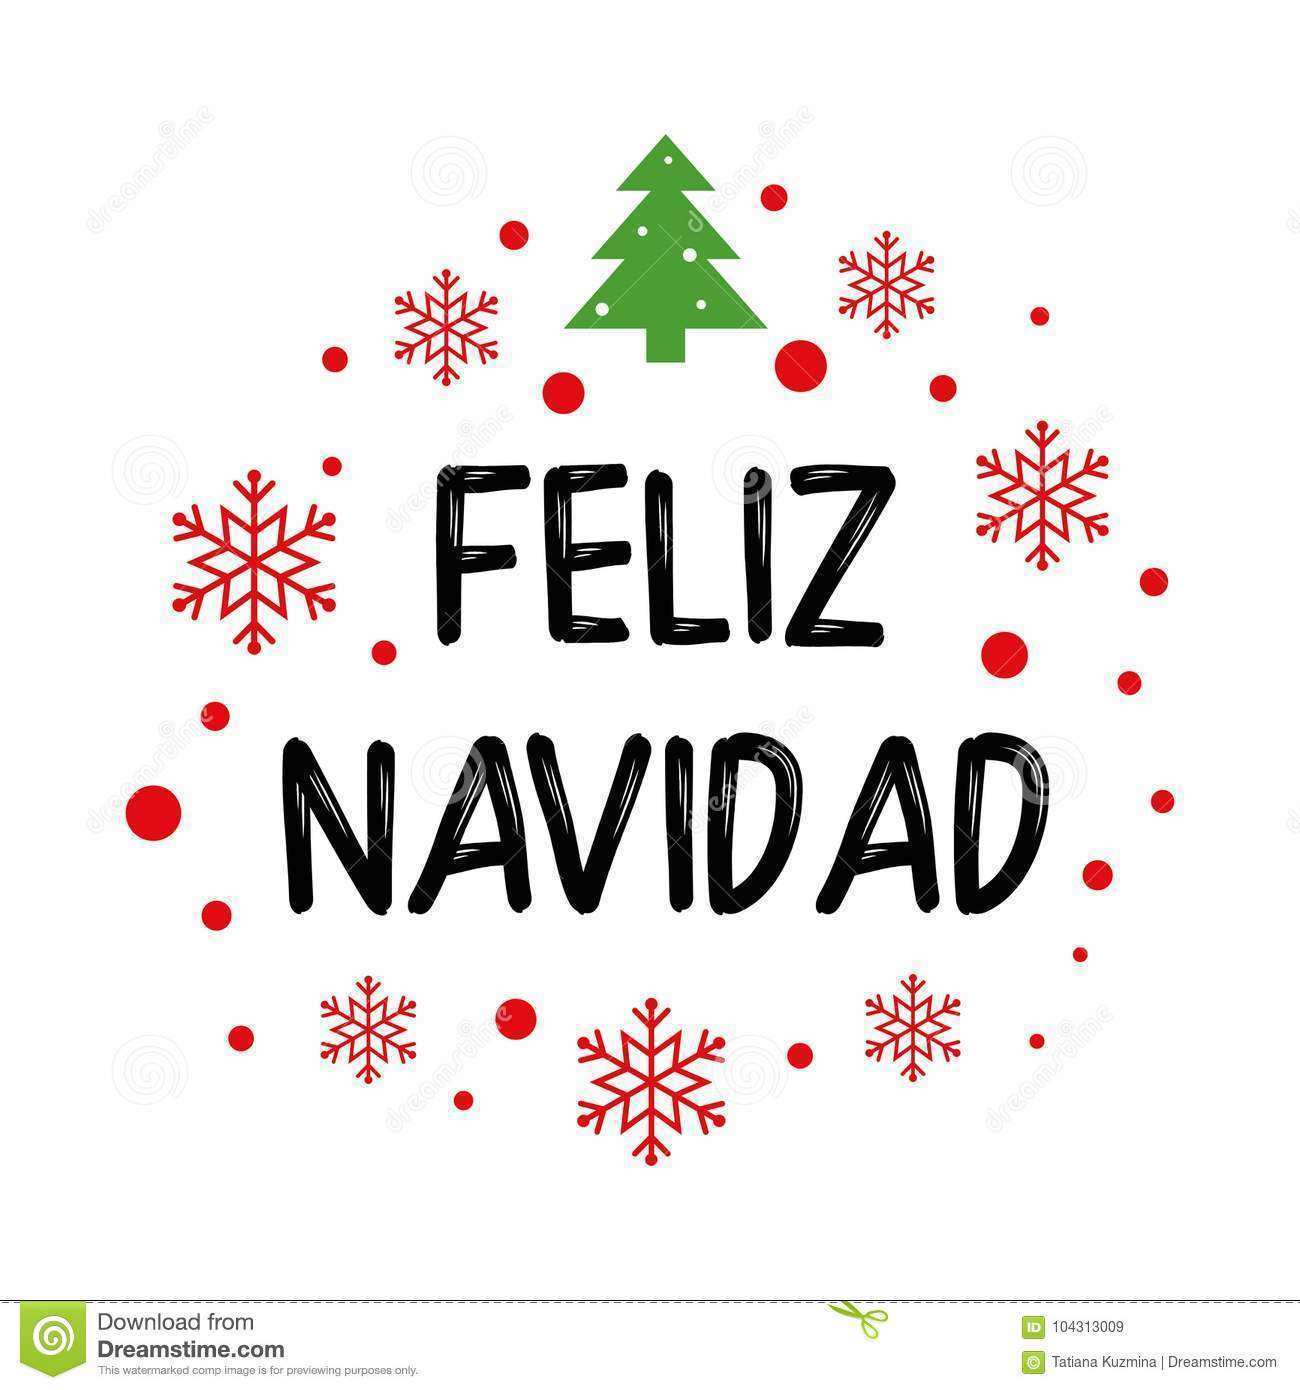 92 Visiting Christmas Card Templates In Spanish in Photoshop with Christmas Card Templates In Spanish